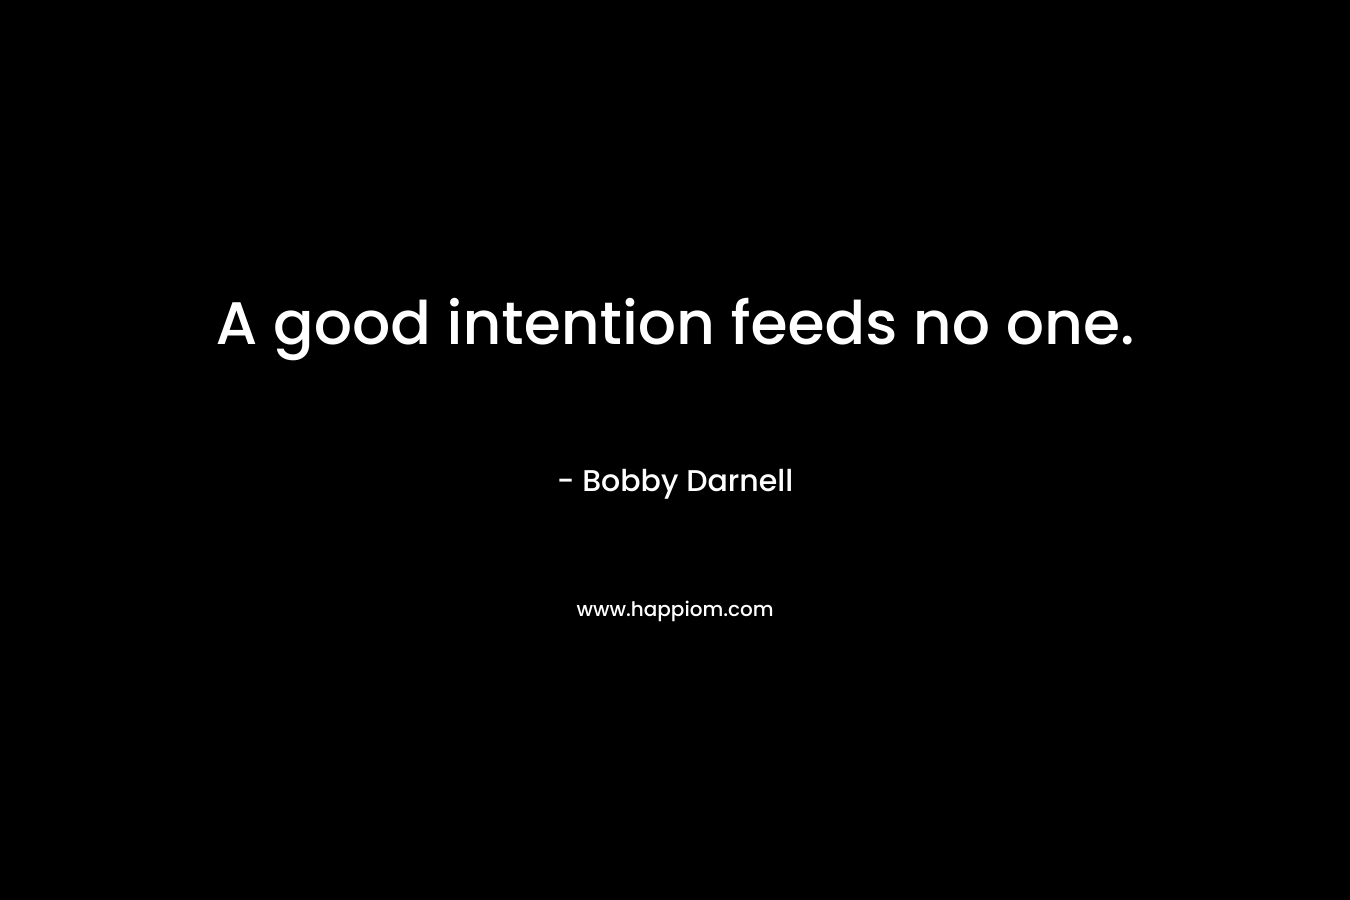 A good intention feeds no one. – Bobby Darnell